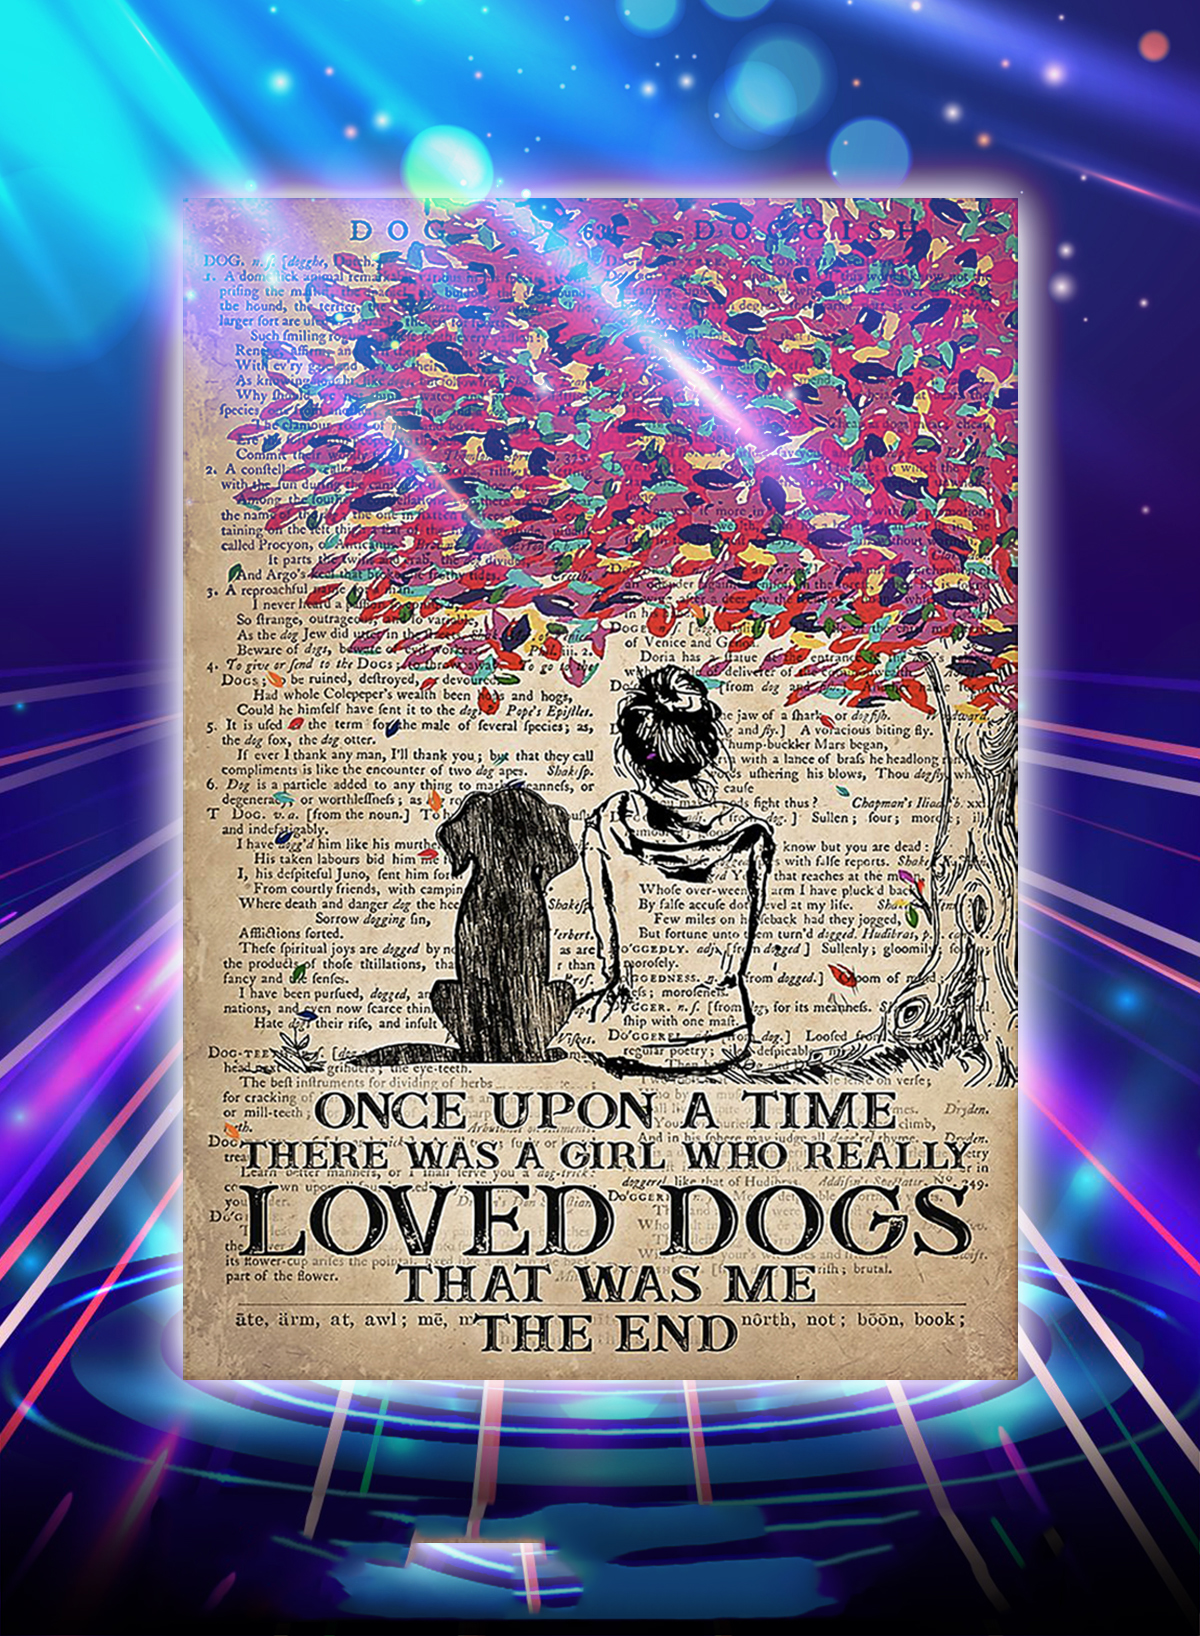 Once upon a time there was a girl who really loved dogs poster - A1